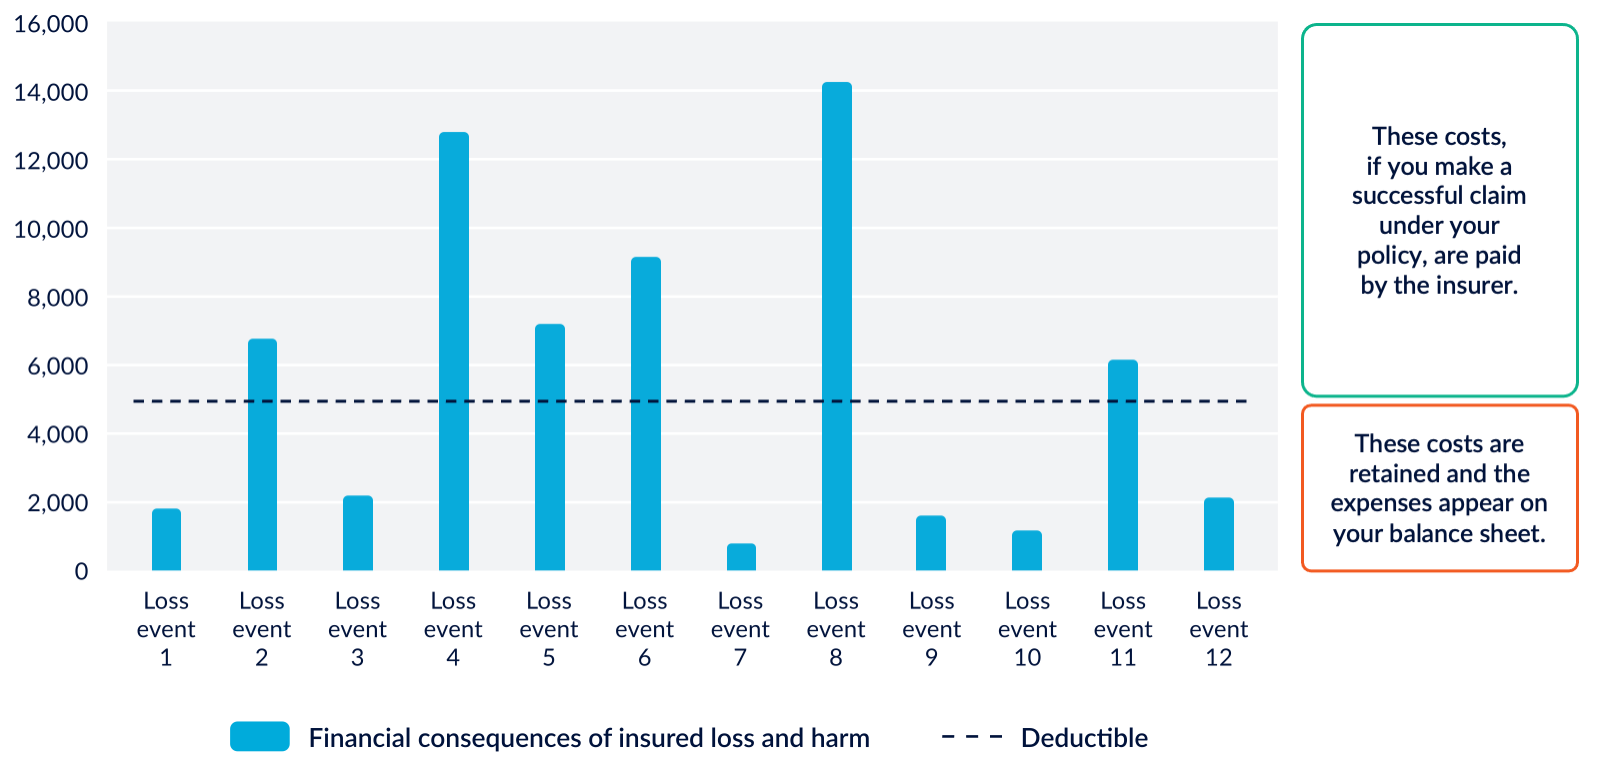 An example of the financial consequences of insured loss and harm and deductible.  